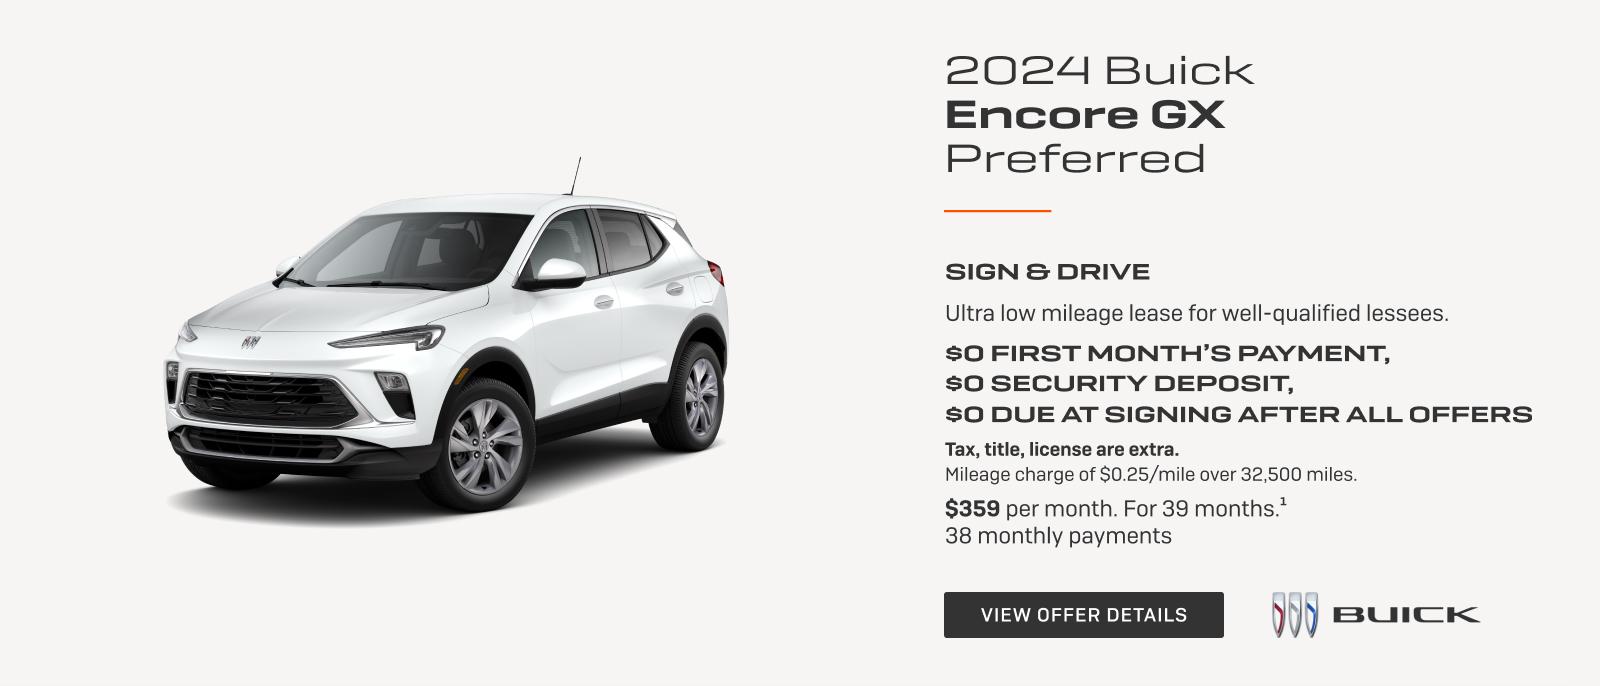 SIGN and DRIVE

Ultra low mileage lease for well-qualified lessees.

$0 FIRST MONTH'S PAYMENT, $0 SECURITY DEPOSIT, $0 DUE AT SIGNING AFTER ALL OFFERS
Tax, title, license are extra. Mileage charge of $0.25/mile over 32,500 miles. 

$404 per month. For 39 months.1
38 monthly payments